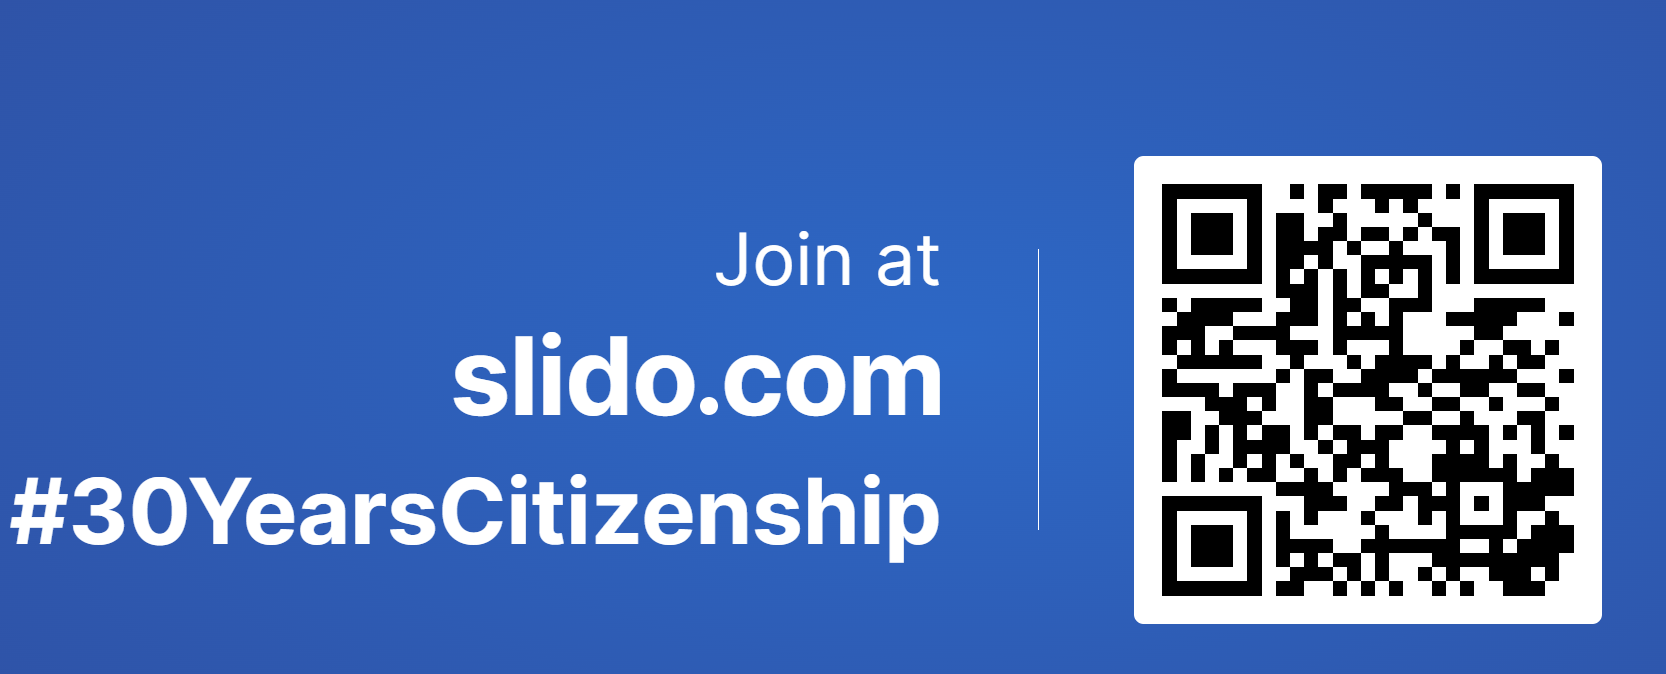 SLIDO - 30 Years of Citizenship Rights_picture